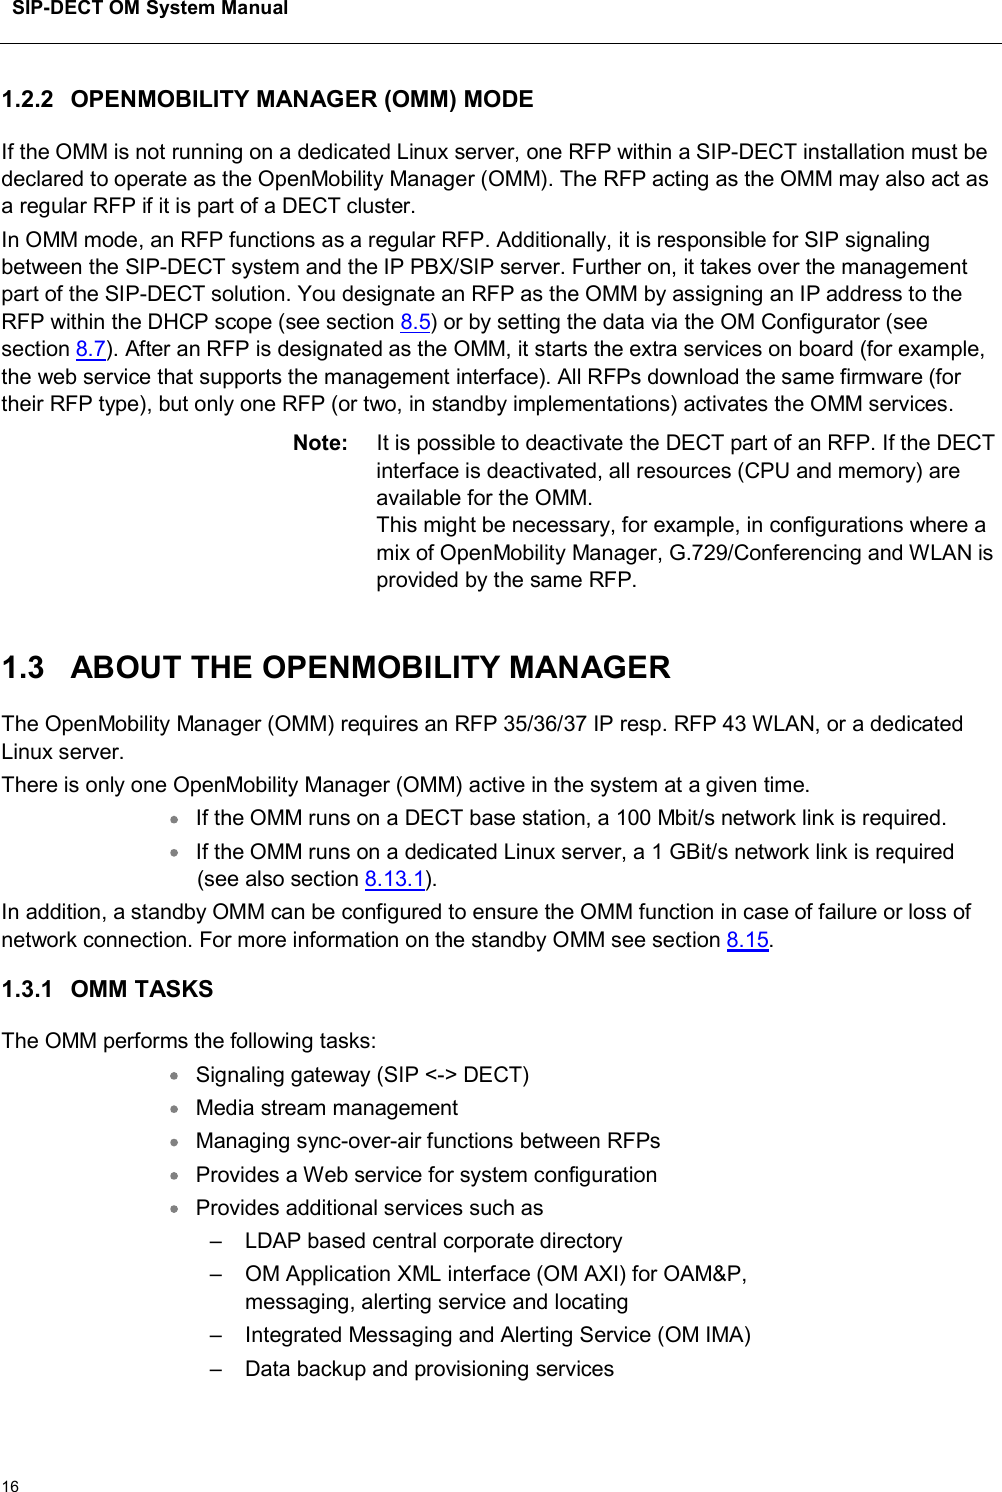 SIP-DECT OM System Manual161.2.2 OPENMOBILITY MANAGER (OMM) MODE If the OMM is not running on a dedicated Linux server, one RFP within a SIP-DECT installation must be declared to operate as the OpenMobility Manager (OMM). The RFP acting as the OMM may also act as a regular RFP if it is part of a DECT cluster. In OMM mode, an RFP functions as a regular RFP. Additionally, it is responsible for SIP signaling between the SIP-DECT system and the IP PBX/SIP server. Further on, it takes over the management part of the SIP-DECT solution. You designate an RFP as the OMM by assigning an IP address to the RFP within the DHCP scope (see section 8.5) or by setting the data via the OM Configurator (seesection 8.7). After an RFP is designated as the OMM, it starts the extra services on board (for example, the web service that supports the management interface). All RFPs download the same firmware (fortheir RFP type), but only one RFP (or two, in standby implementations) activates the OMM services. Note: It is possible to deactivate the DECT part of an RFP. If the DECT interface is deactivated, all resources (CPU and memory) are available for the OMM. This might be necessary, for example, in configurations where amix of OpenMobility Manager, G.729/Conferencing and WLAN is provided by the same RFP.1.3 ABOUT THE OPENMOBILITY MANAGERThe OpenMobility Manager (OMM) requires an RFP 35/36/37 IP resp. RFP 43 WLAN, or a dedicated Linux server.There is only one OpenMobility Manager (OMM) active in the system at a given time.If the OMM runs on a DECT base station, a 100 Mbit/s network link is required.If the OMM runs on a dedicated Linux server, a 1 GBit/s network link is required (see also section 8.13.1).In addition, a standby OMM can be configured to ensure the OMM function in case of failure or loss of network connection. For more information on the standby OMM see section 8.15.1.3.1 OMM TASKSThe OMM performs the following tasks: Signaling gateway (SIP &lt;-&gt; DECT) Media stream management Managing sync-over-air functions between RFPs Provides a Web service for system configuration Provides additional services such as – LDAP based central corporate directory – OM Application XML interface (OM AXI) for OAM&amp;P, messaging, alerting service and locating – Integrated Messaging and Alerting Service (OM IMA) – Data backup and provisioning services 